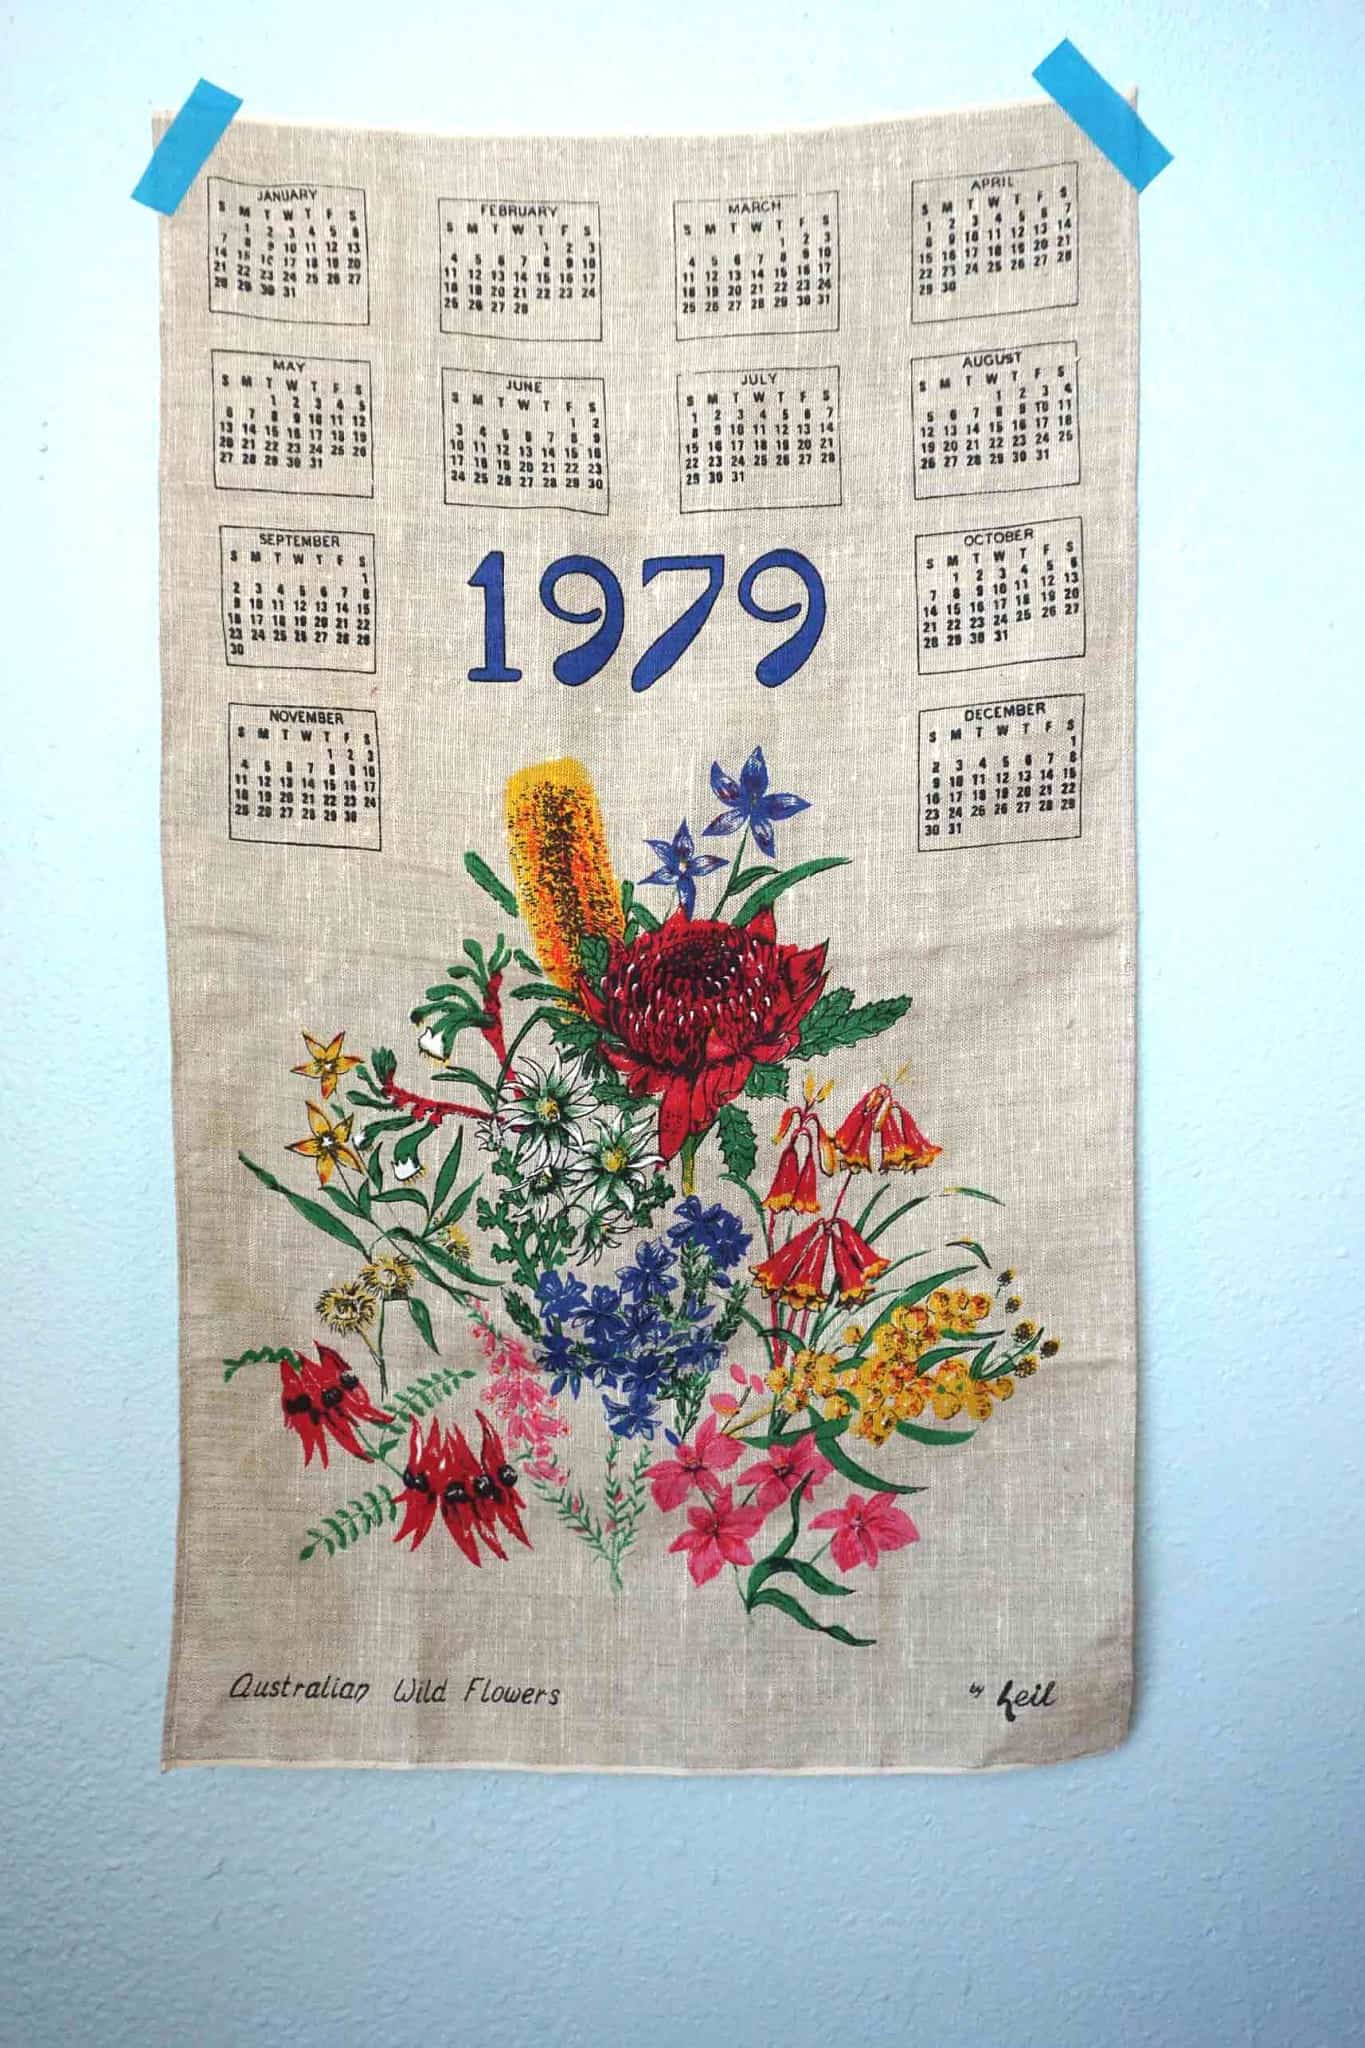 Vintage Tea towel taped to the wall